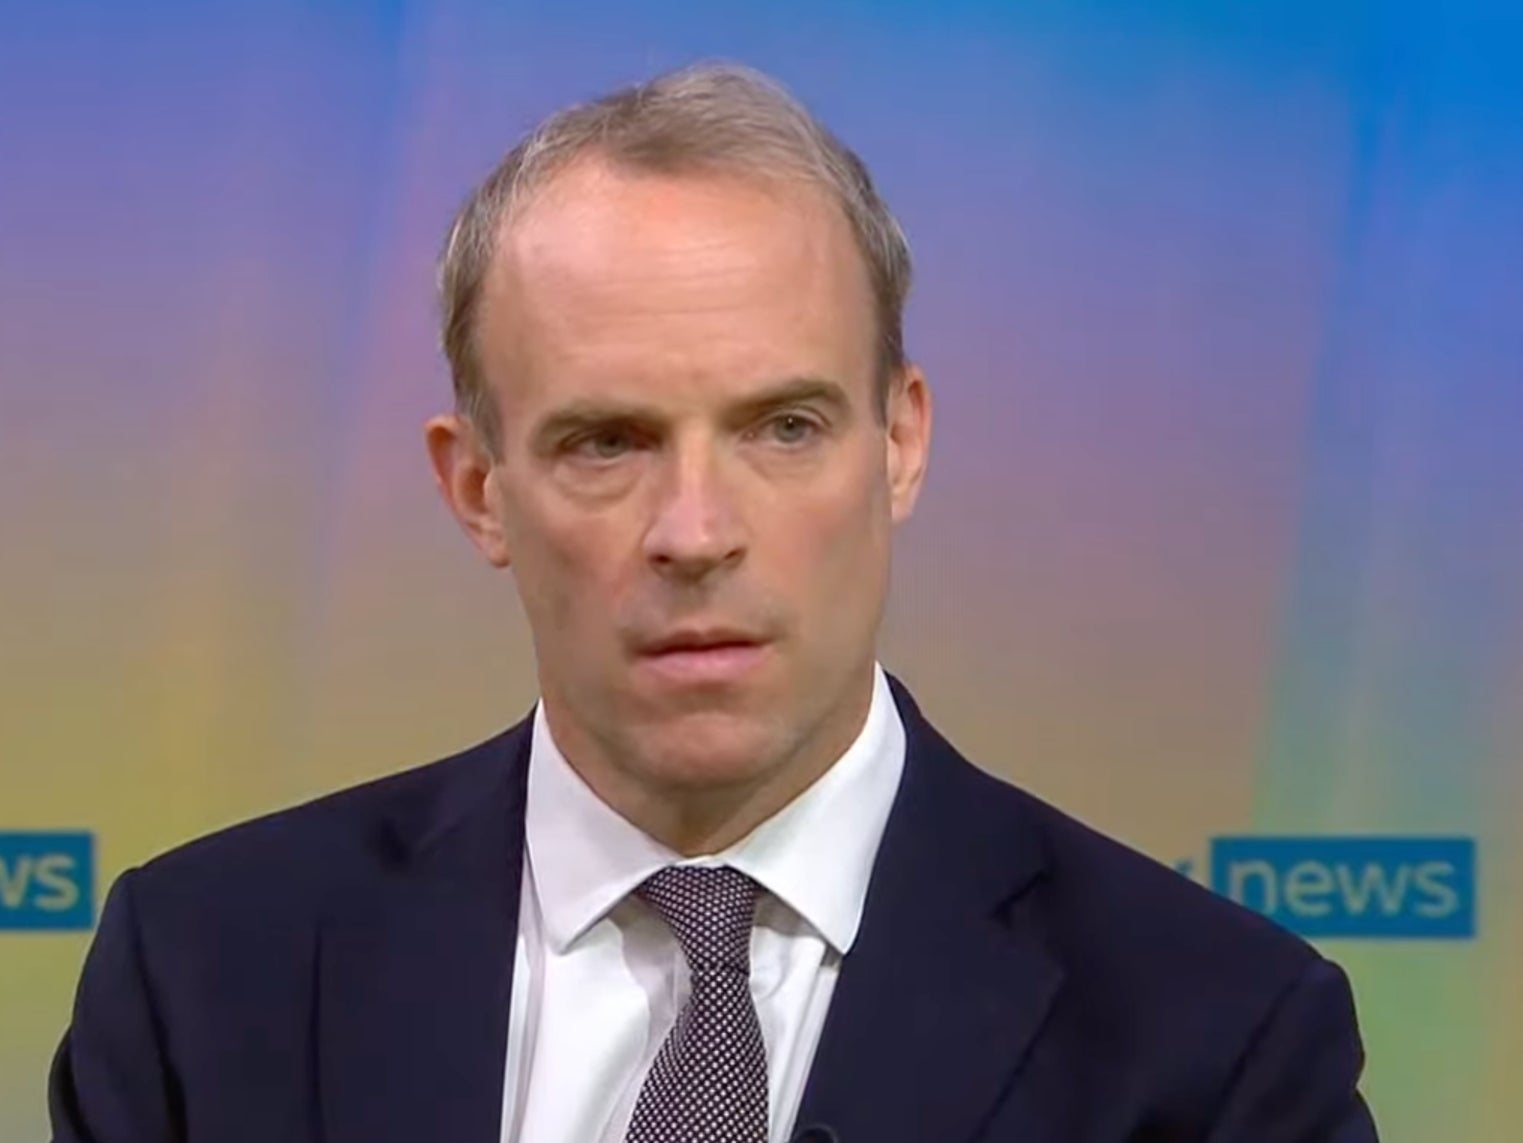 Dominic Raab, explaining why problems are nothing to do with him